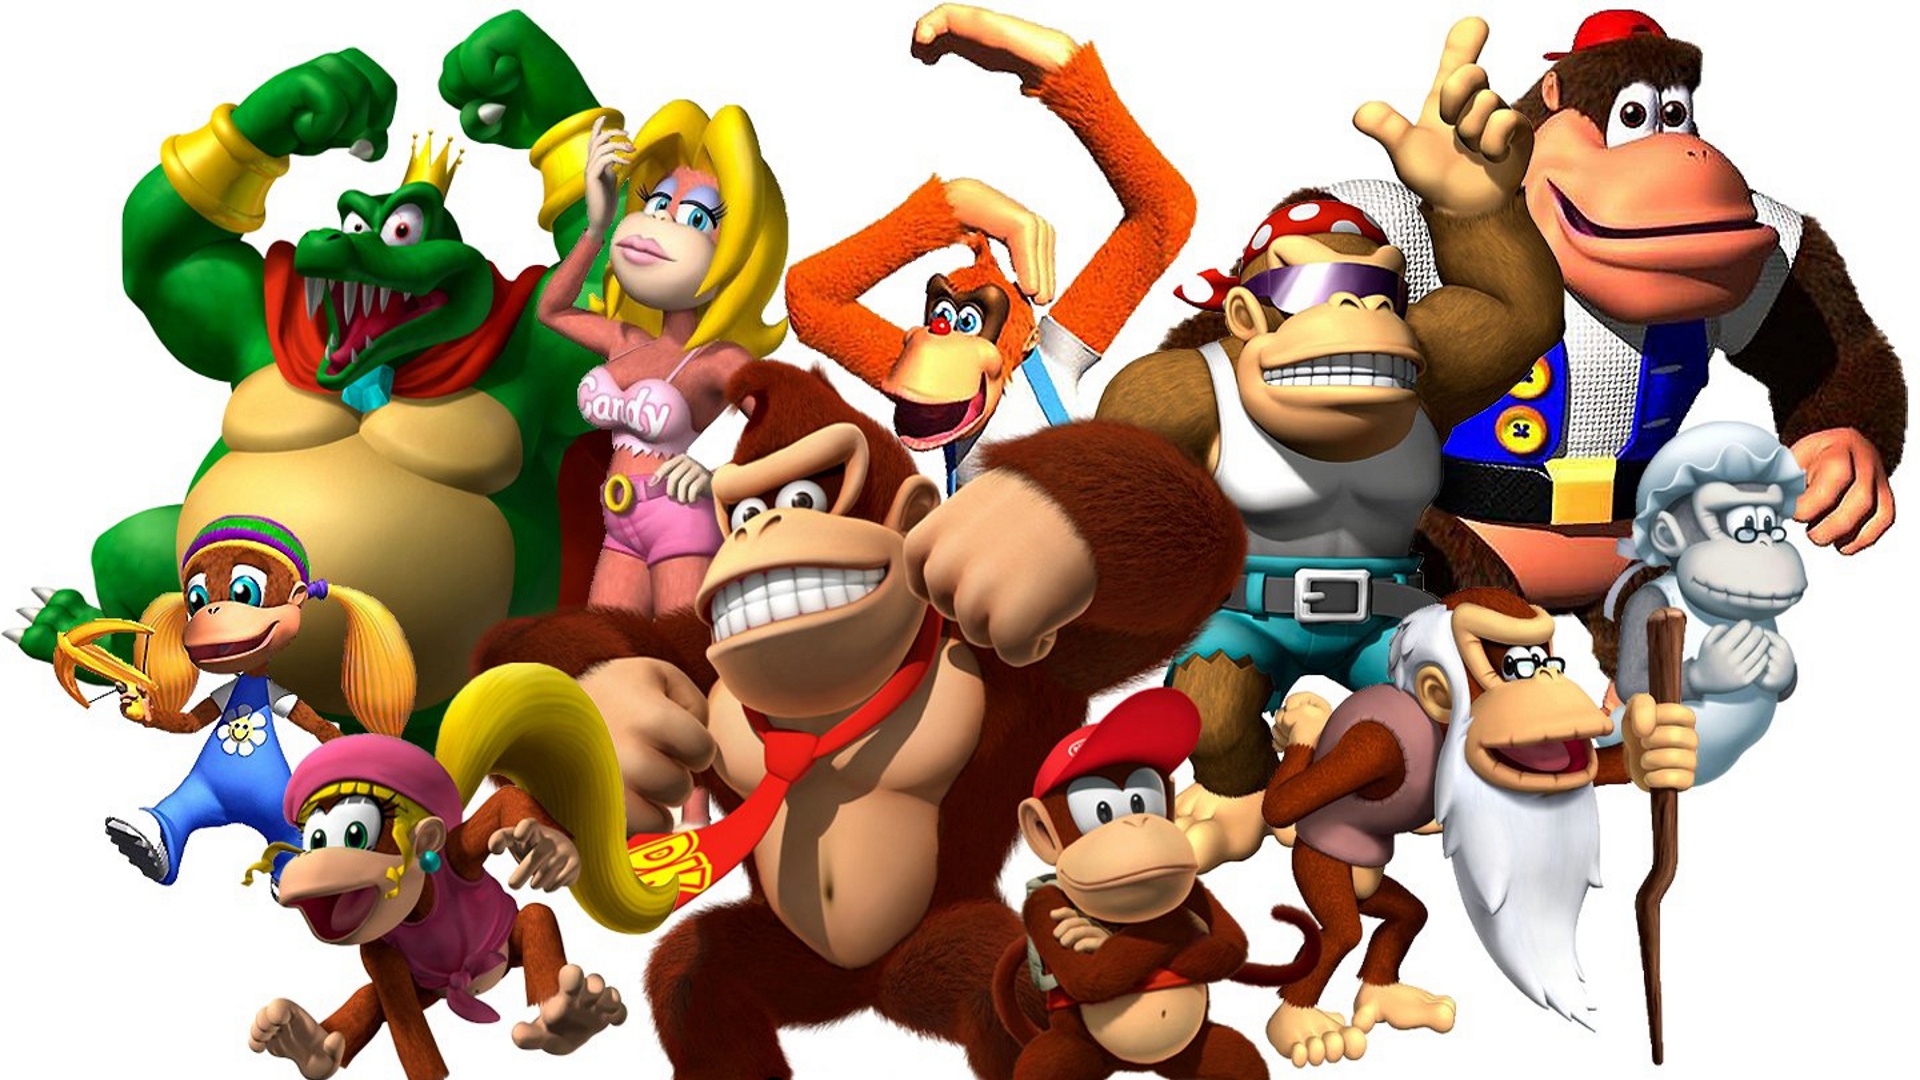 Donkey Kong 64 screenshots, image and picture